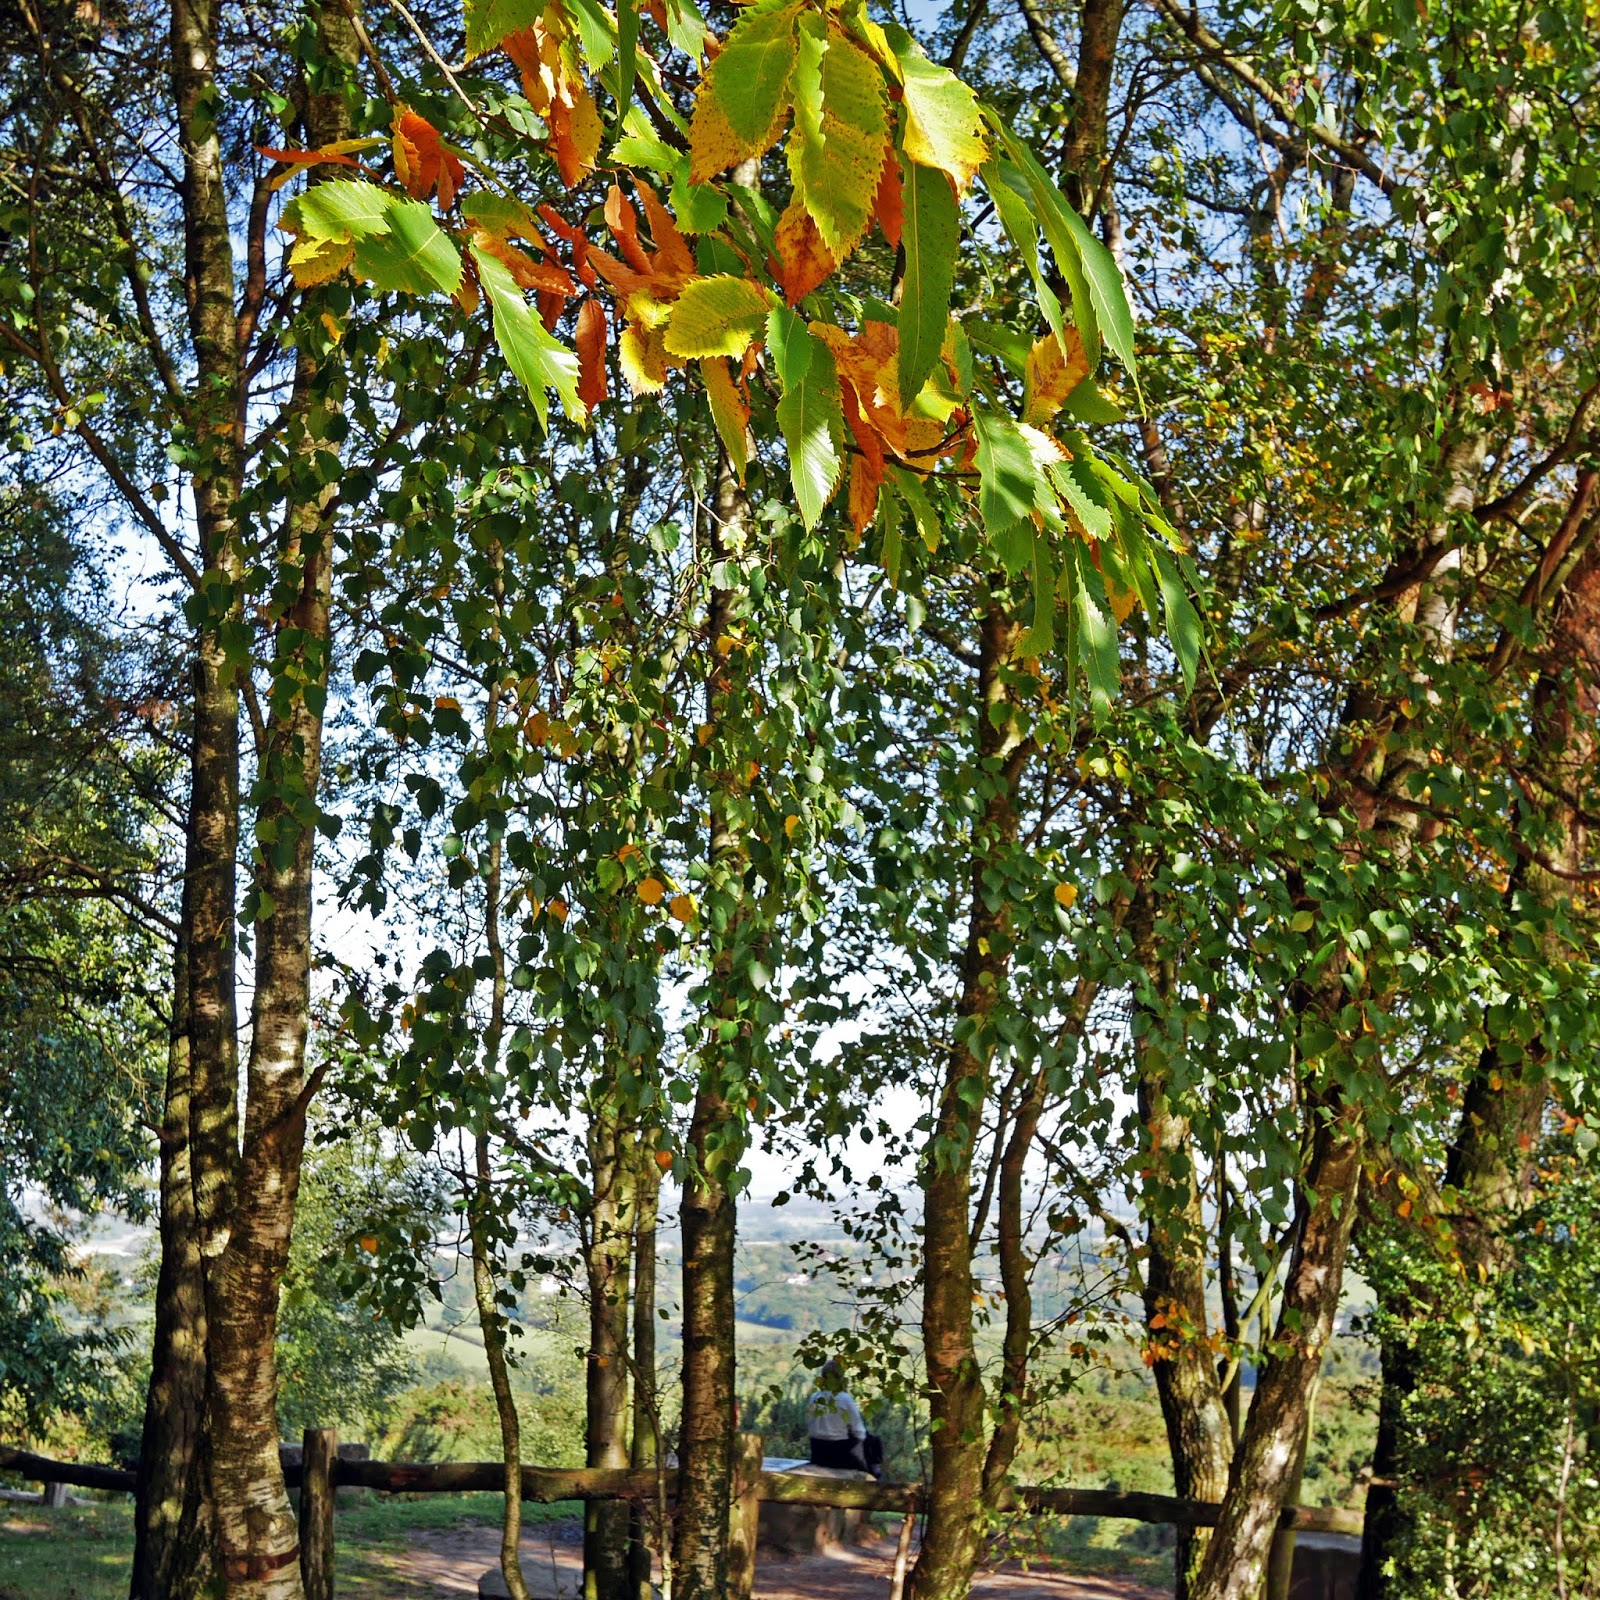 Autumn leaves near the A.A. Milne and E.H. Shepard Memorial, Ashdown Forest